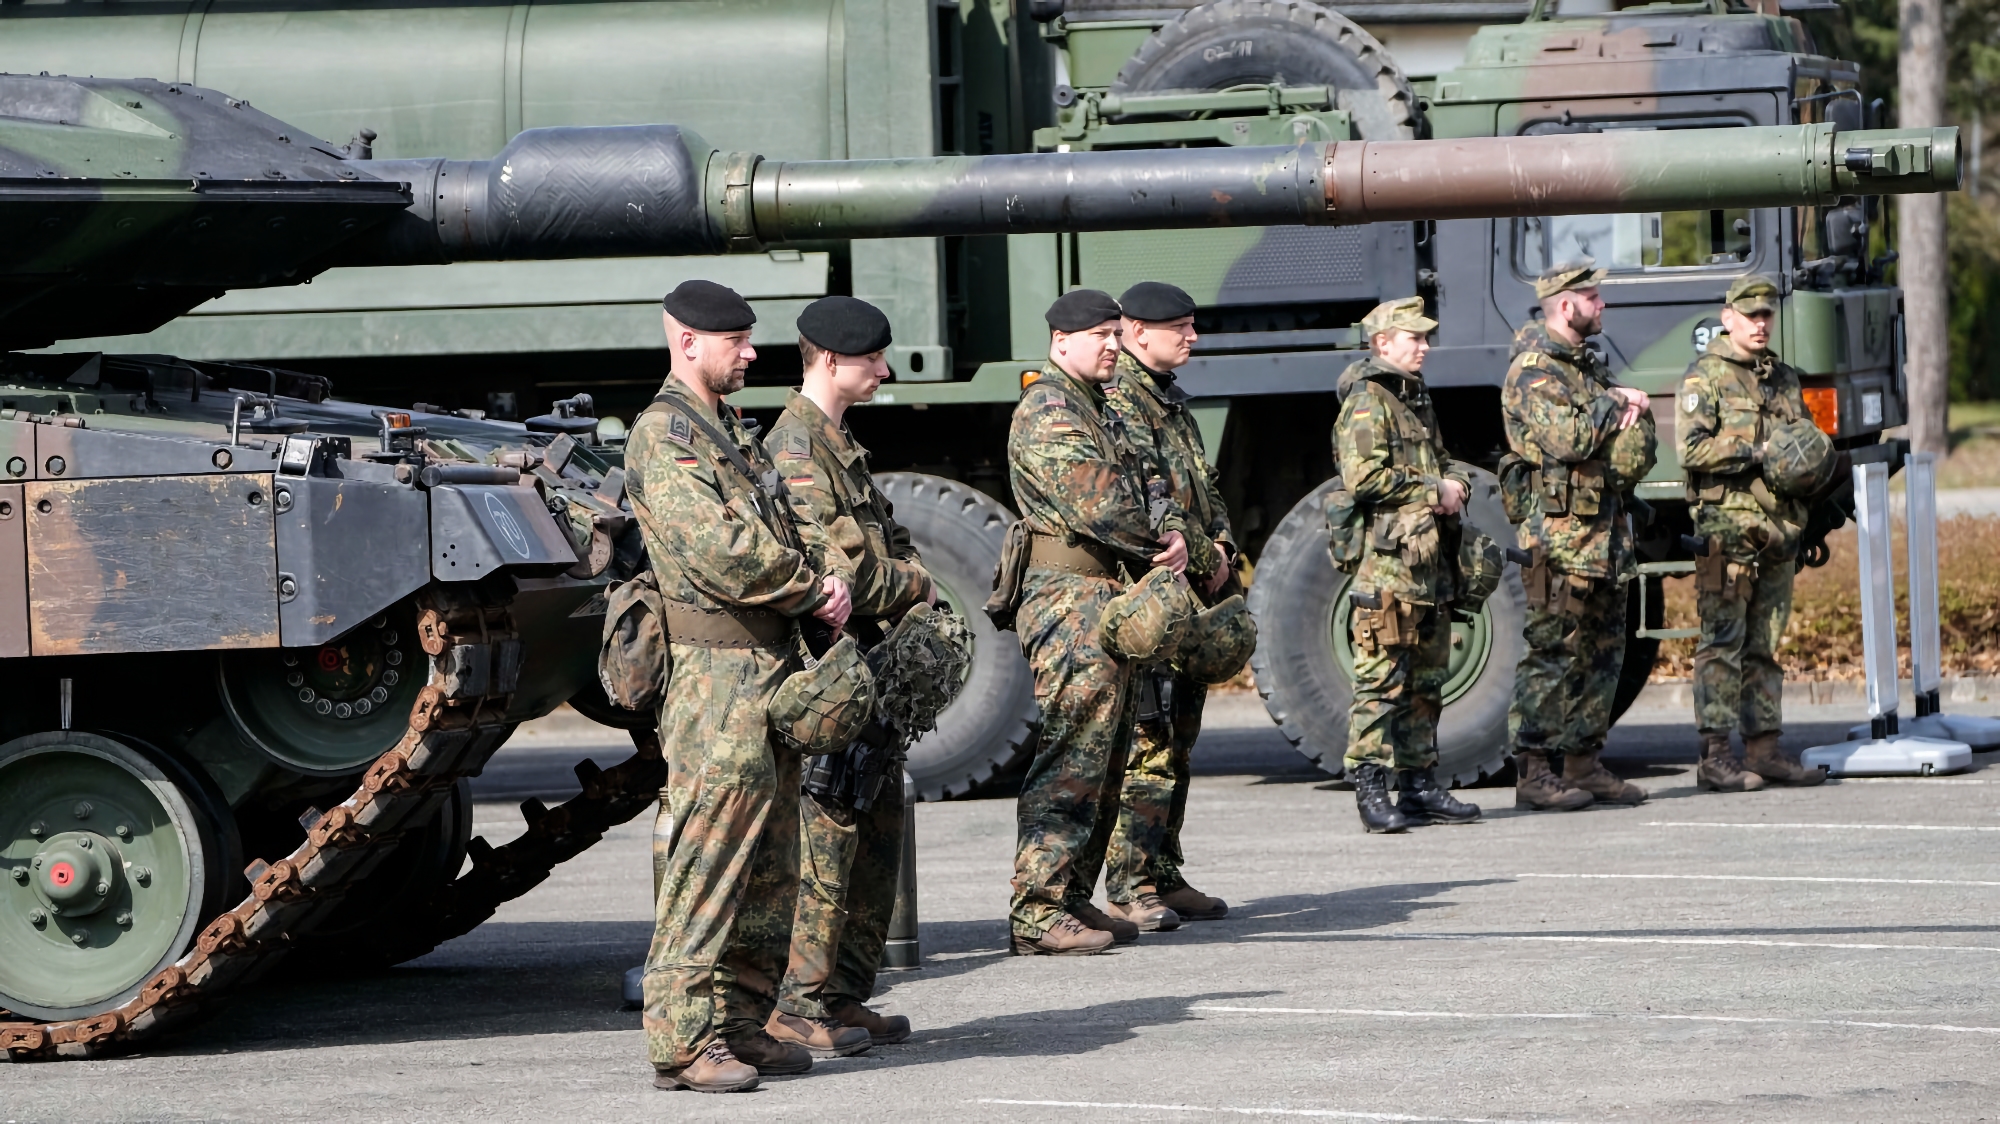 APWKS missile launchers, Oshkosh M1070 tank tractor, pickup trucks, reconnaissance UAVs, and remote-controlled tracked vehicles: Germany gives Ukraine a new military aid package